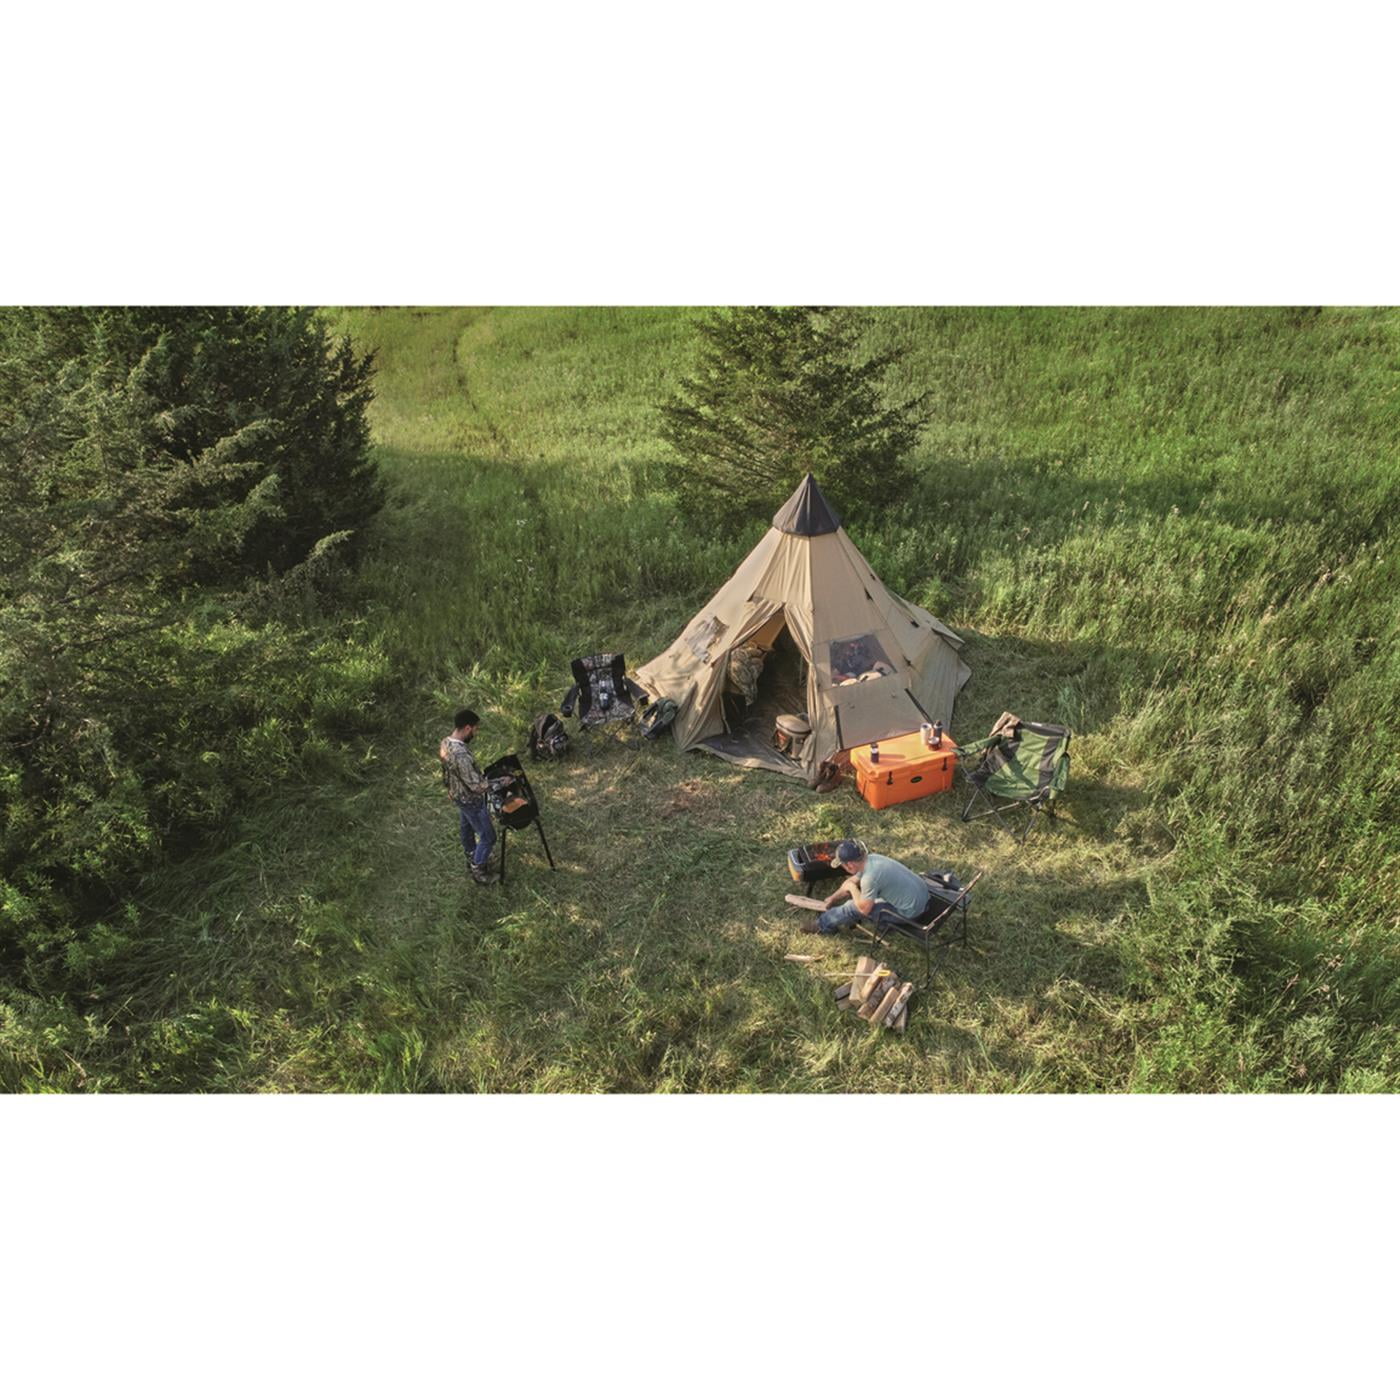 Guide Gear Camping Teepee Tent for Adults, Outdoor, Waterproof, Family, 6 Person, 14' x 14'